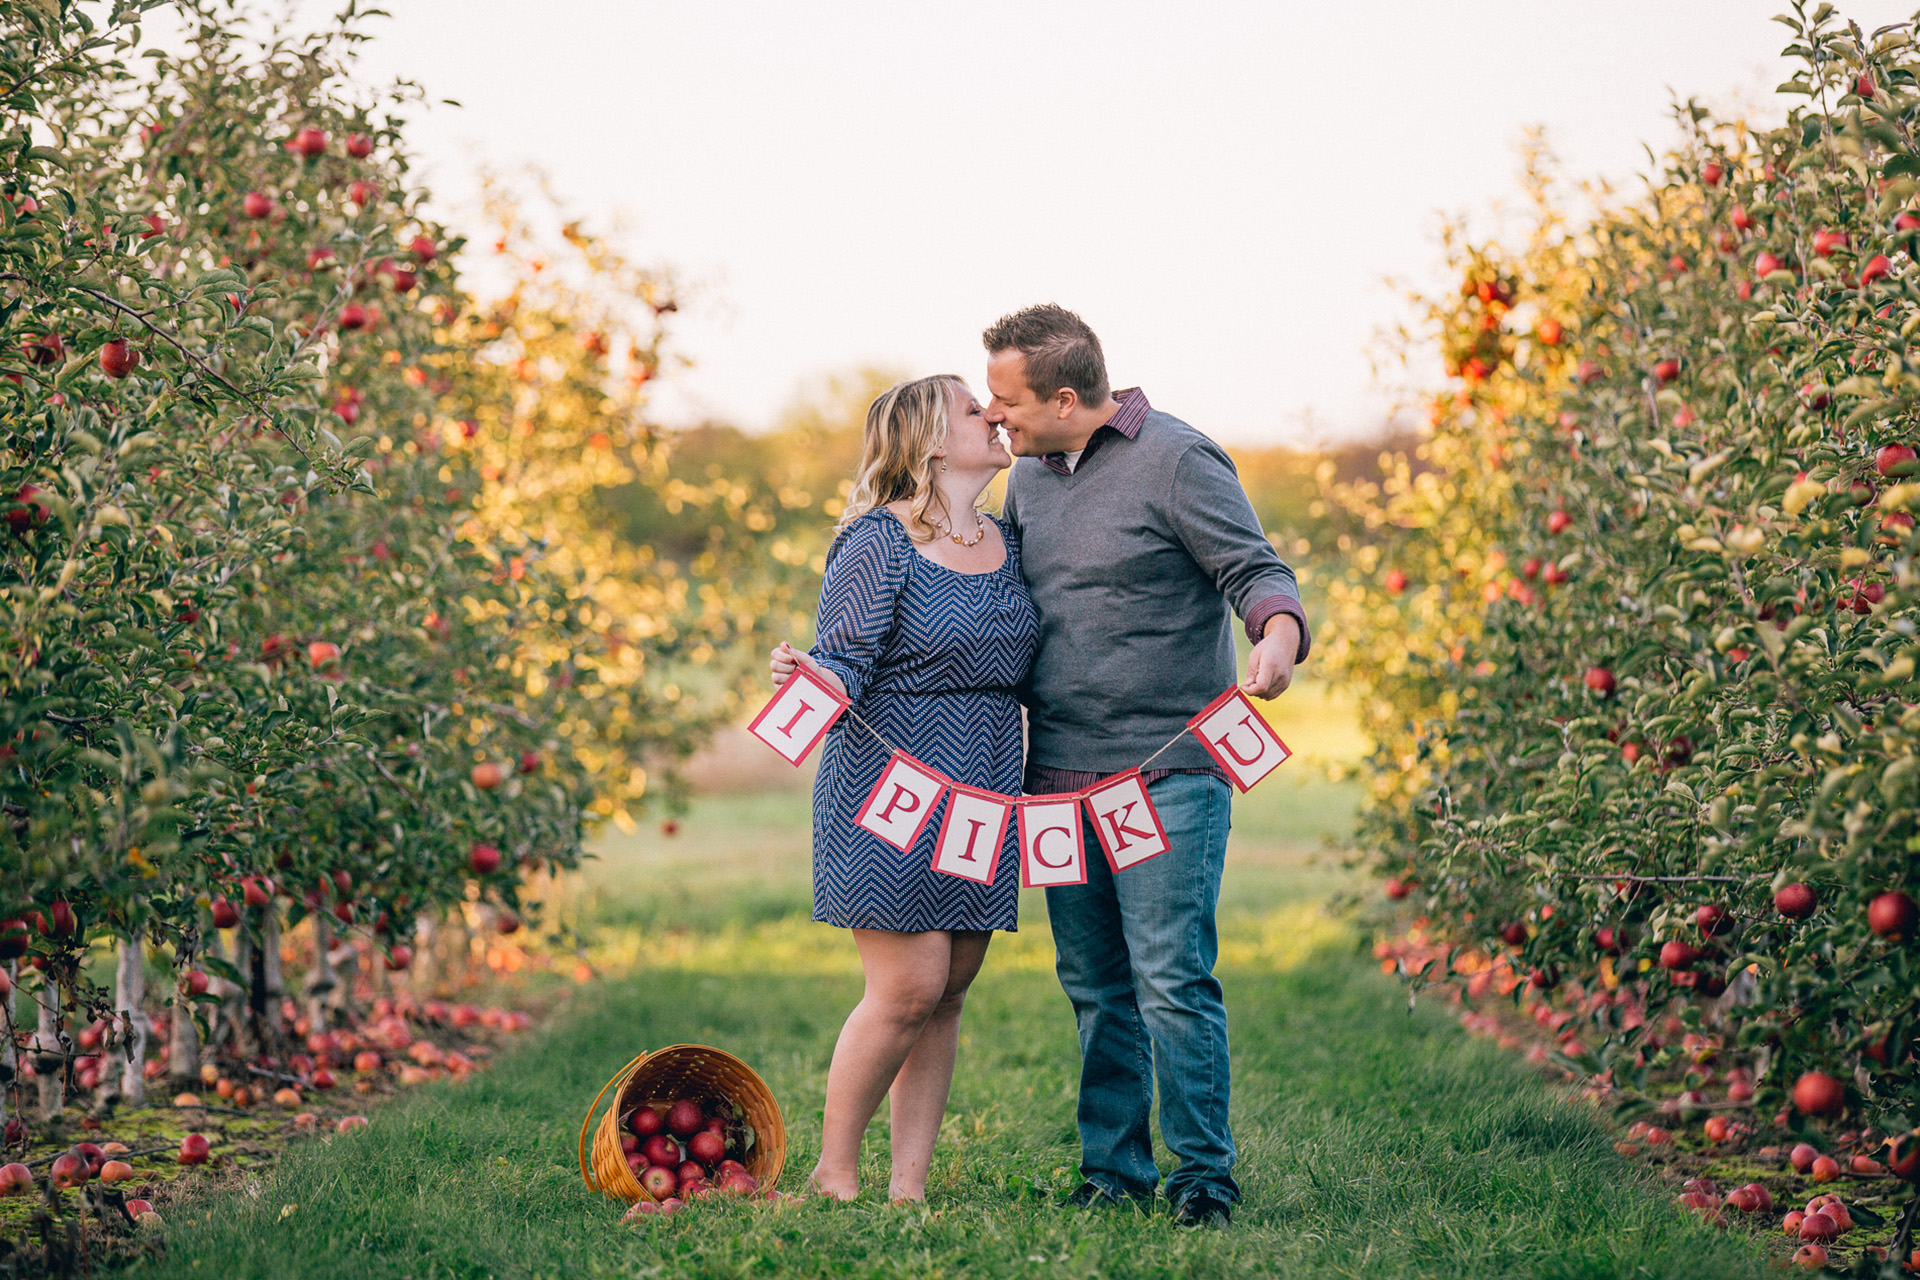 Fall Apple Orchard Engagement Photos in Ohio 11.jpg